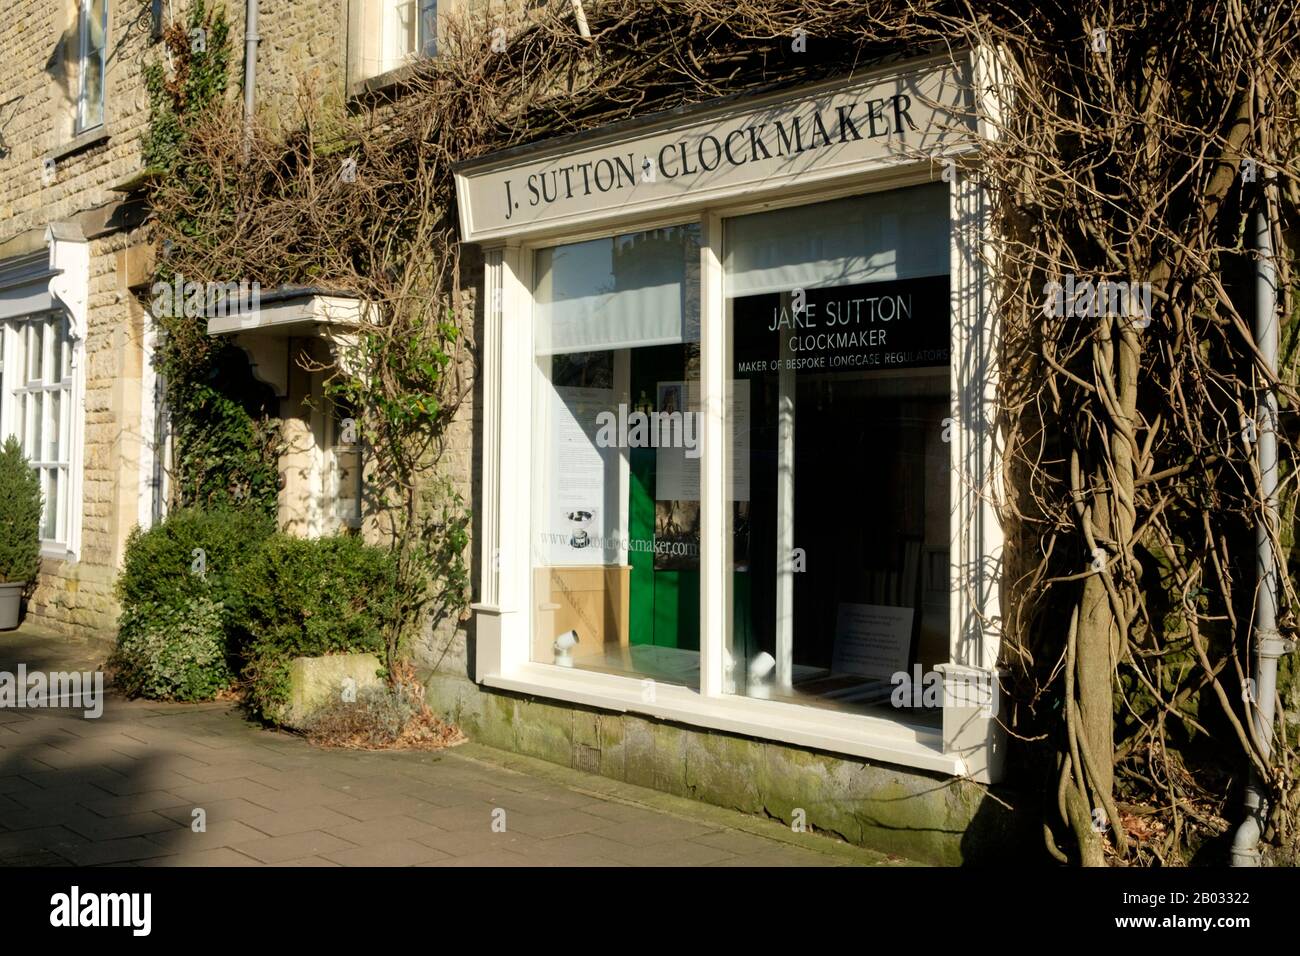 Fairford is a small Gloucestershire town.  Set in the Central Cotswolds it is a few miles East of Cirencester  J sutton Clockmaker shop Stock Photo